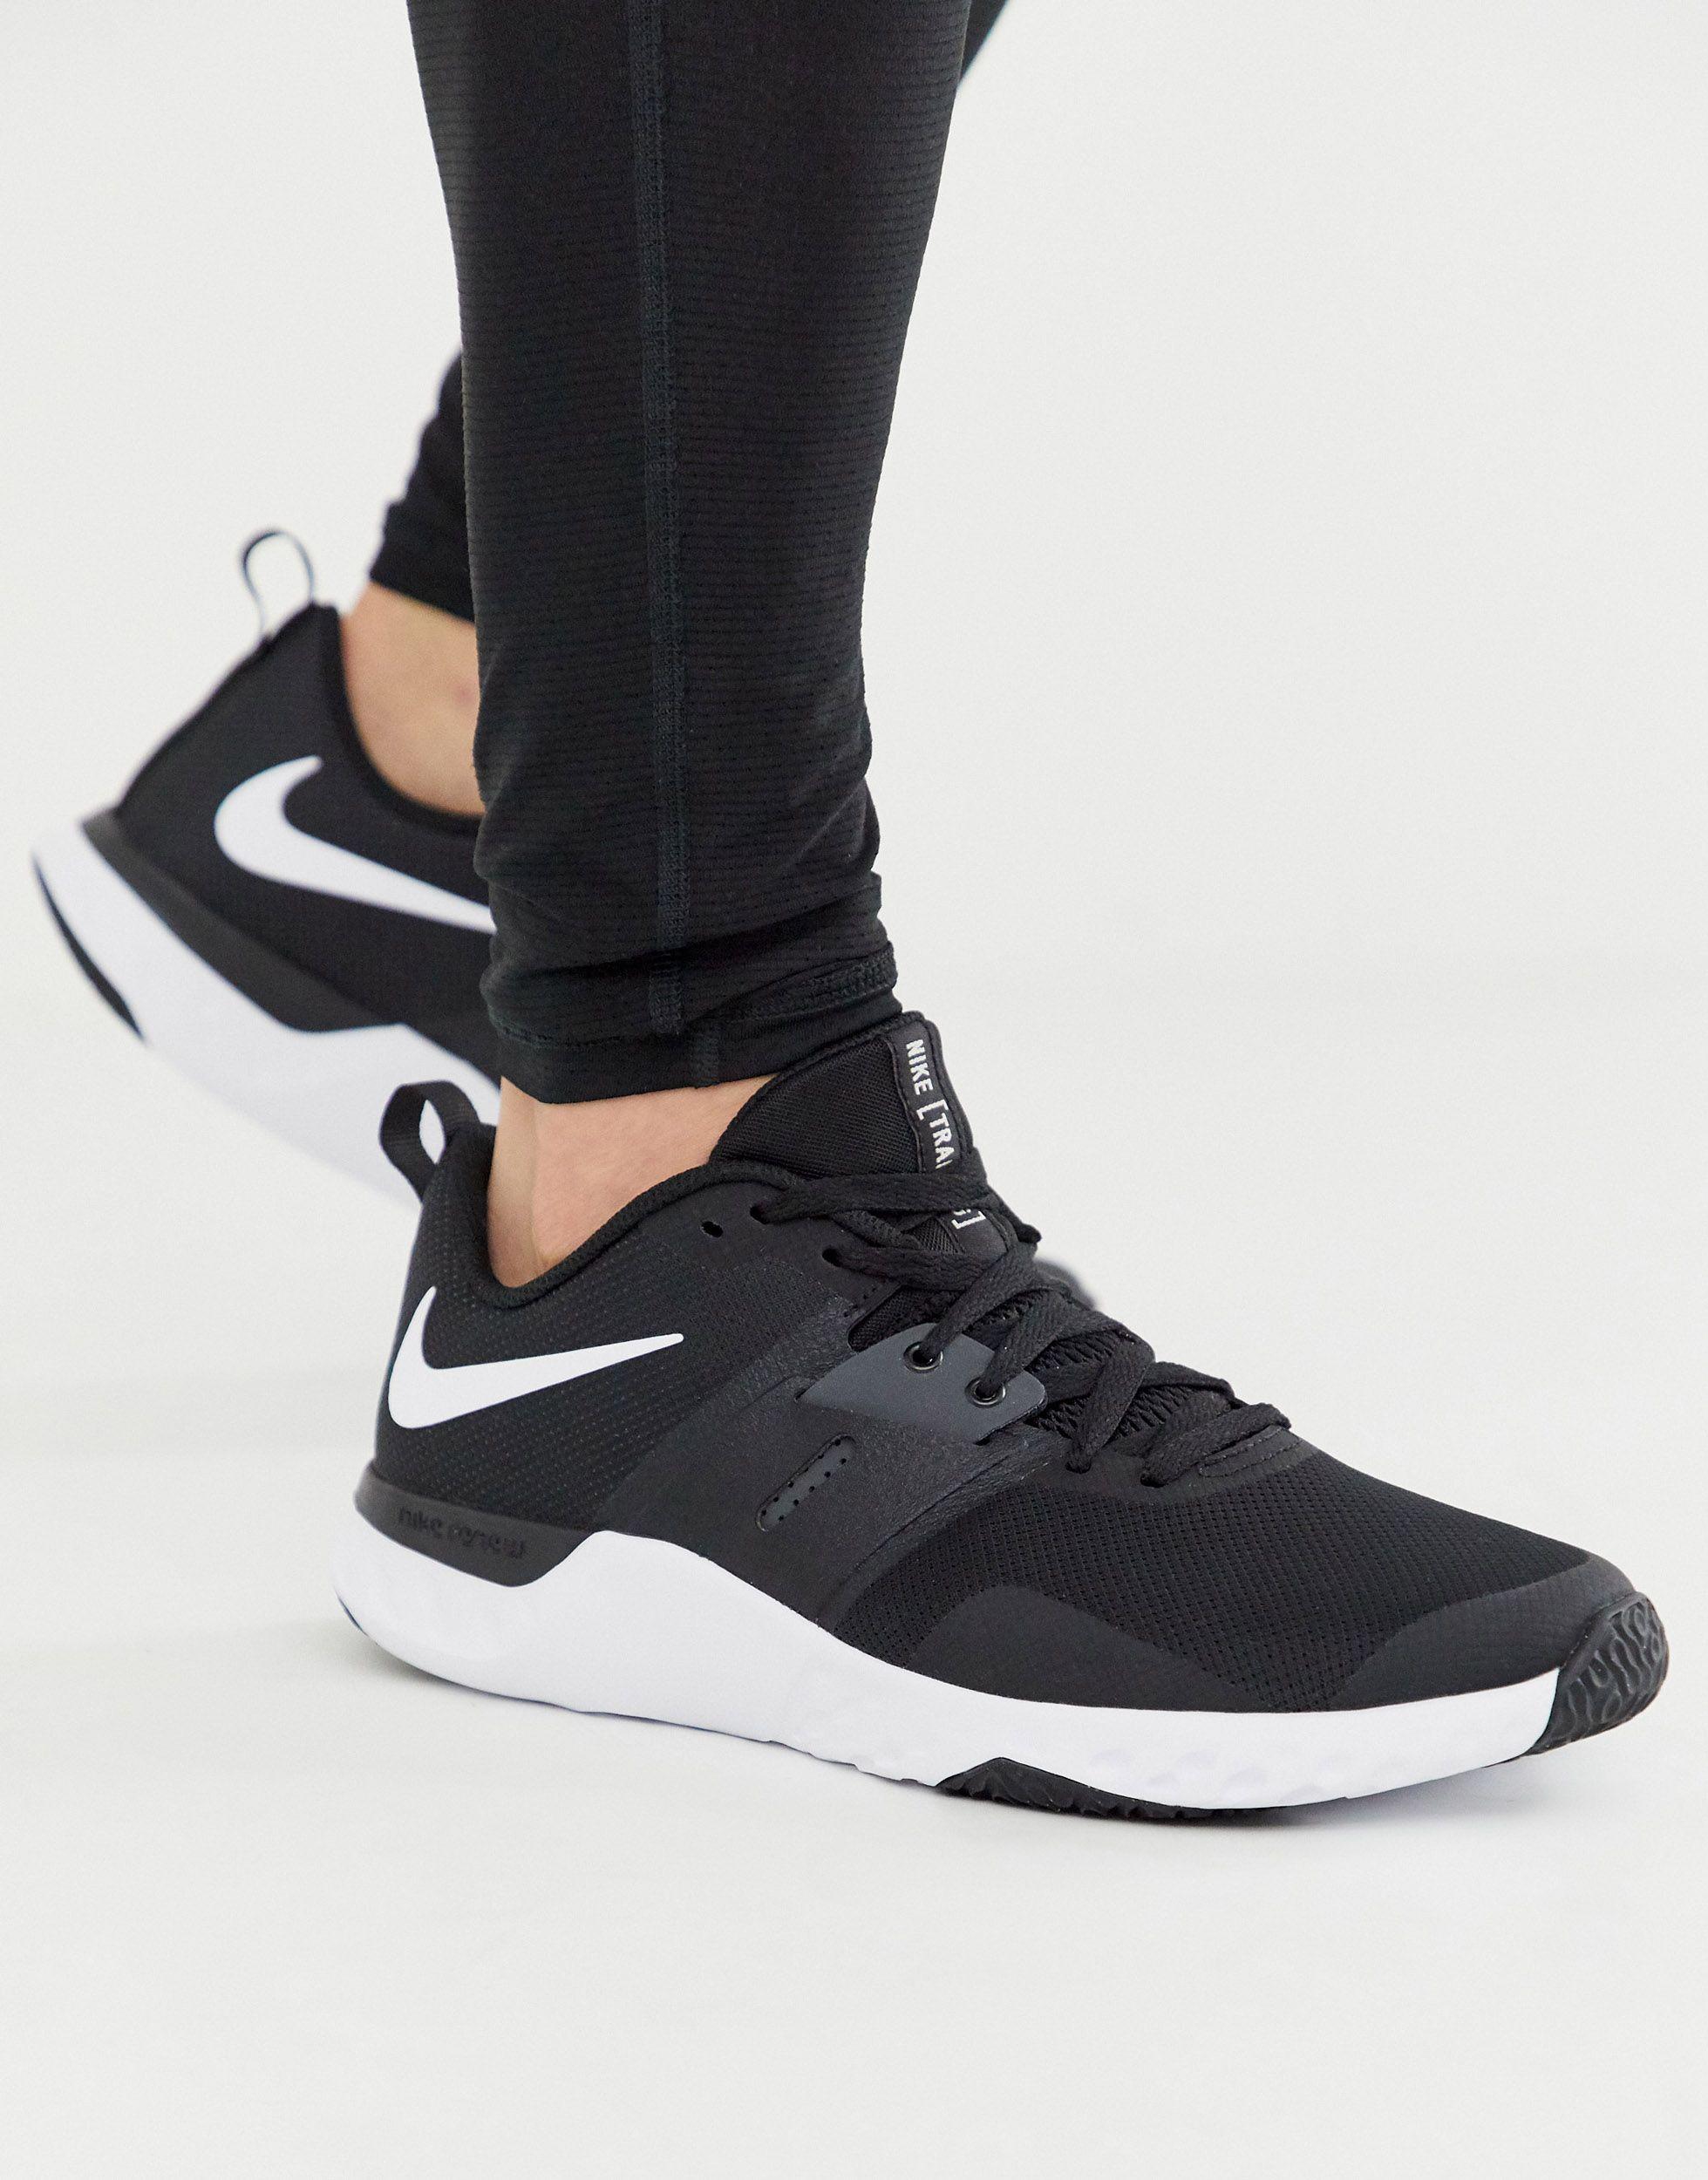 Nike Lace Renew Retaliation Tr 2 Training Shoes in Black/White (Black) for  Men - Save 42% | Lyst